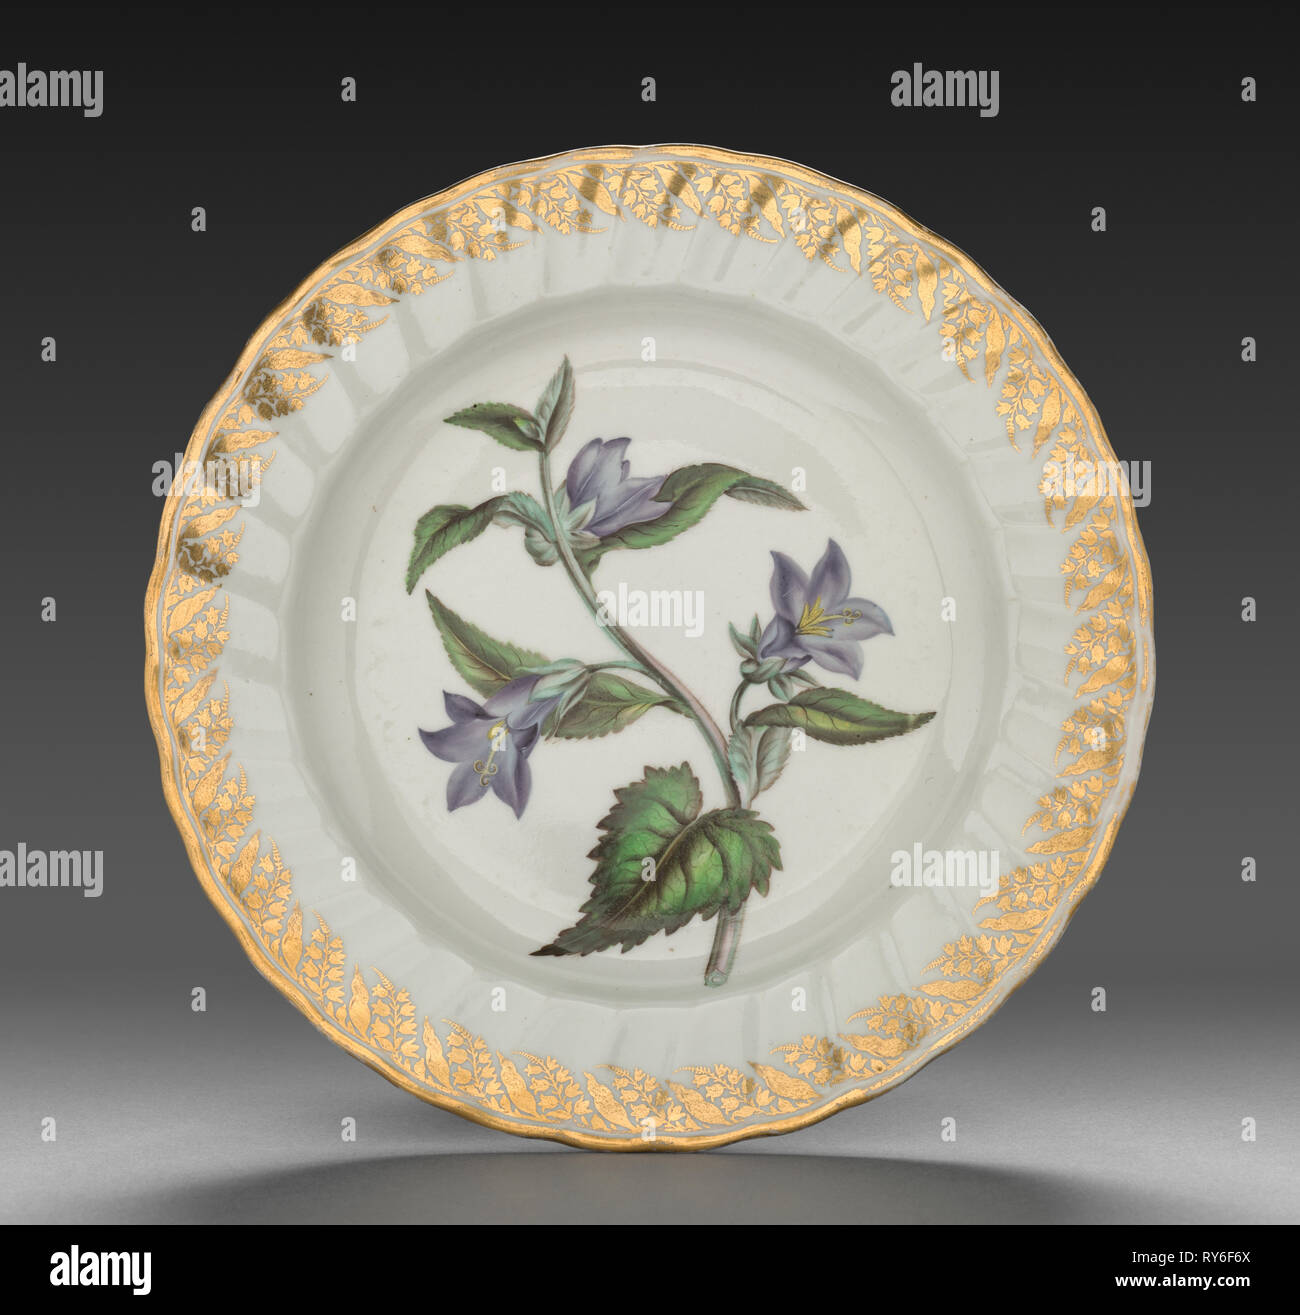 Plate from Dessert Service: Nettle Leaved Bell Flower, c. 1800. Derby (Crown Derby Period) (British). Porcelain; diameter: 23.4 cm (9 3/16 in.); overall: 3.1 cm (1 1/4 in Stock Photo